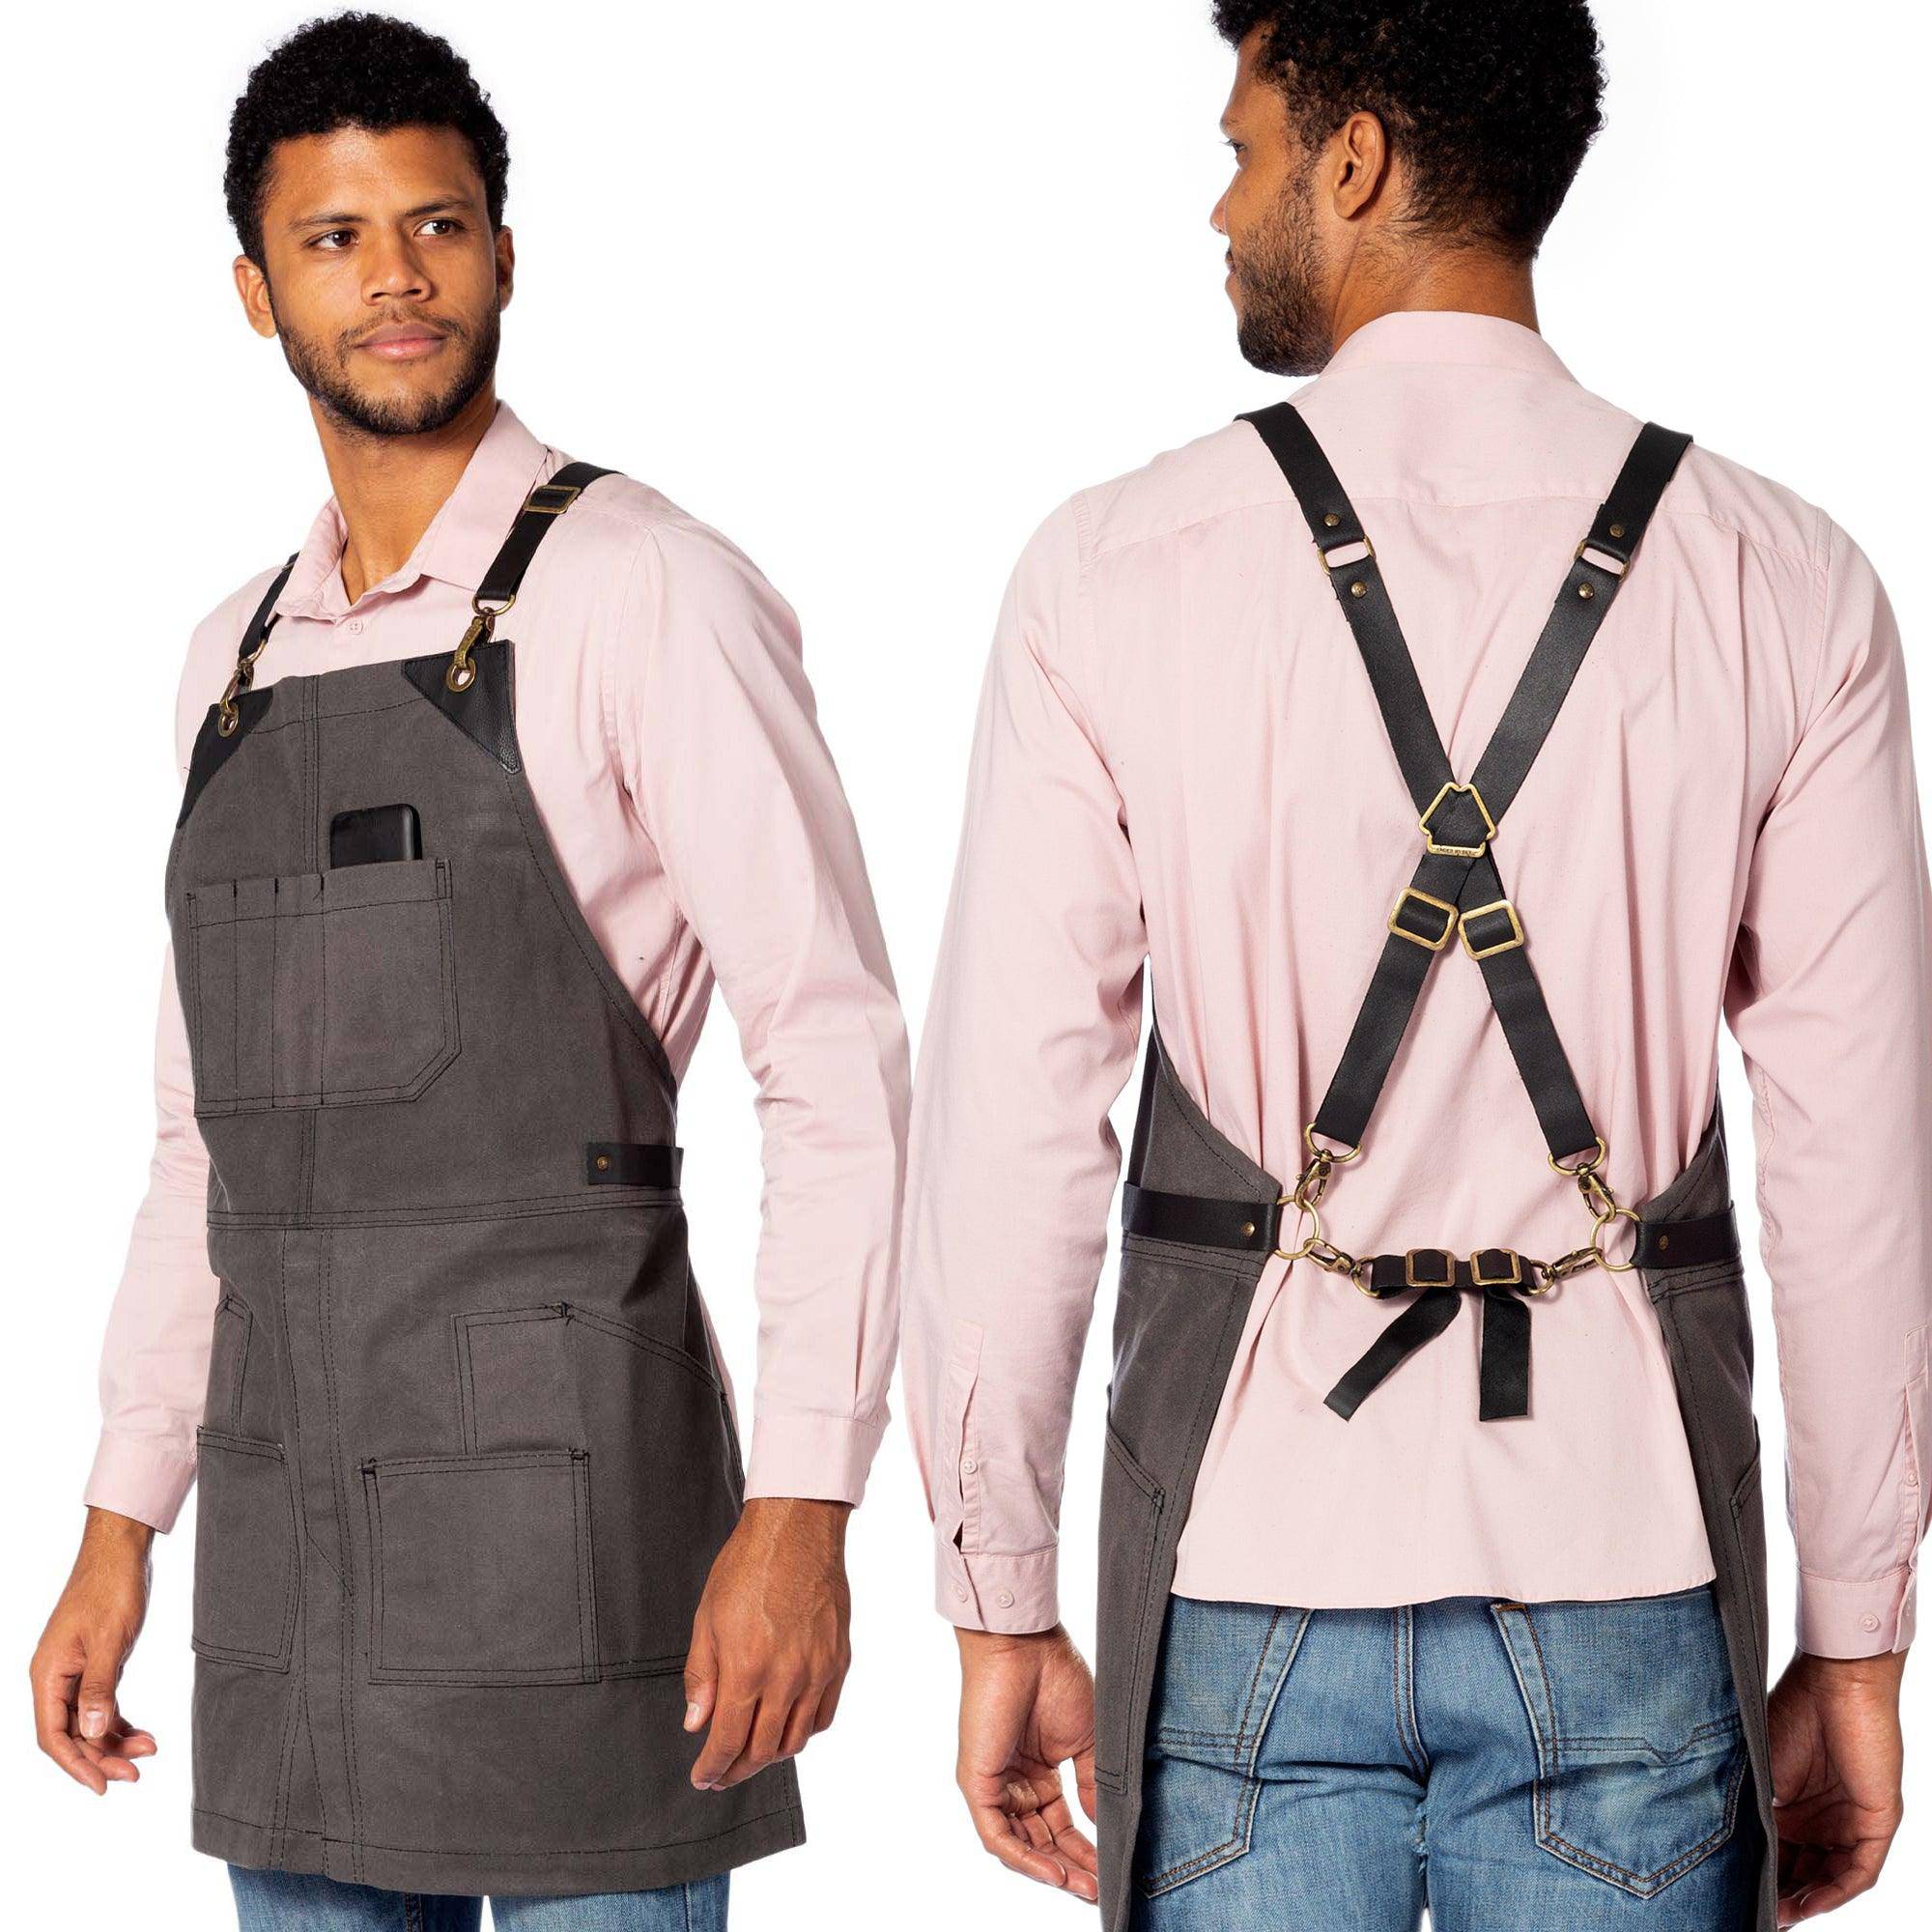  Cargo Green Apron – Cross-Back with Leather Straps, Heavy-Duty  Waxed Canvas and Split-Leg – Adjustable for Men and Women – Pro Woodworker,  Mechanic, Blacksmith, Welder, Artist Aprons : Handmade Products